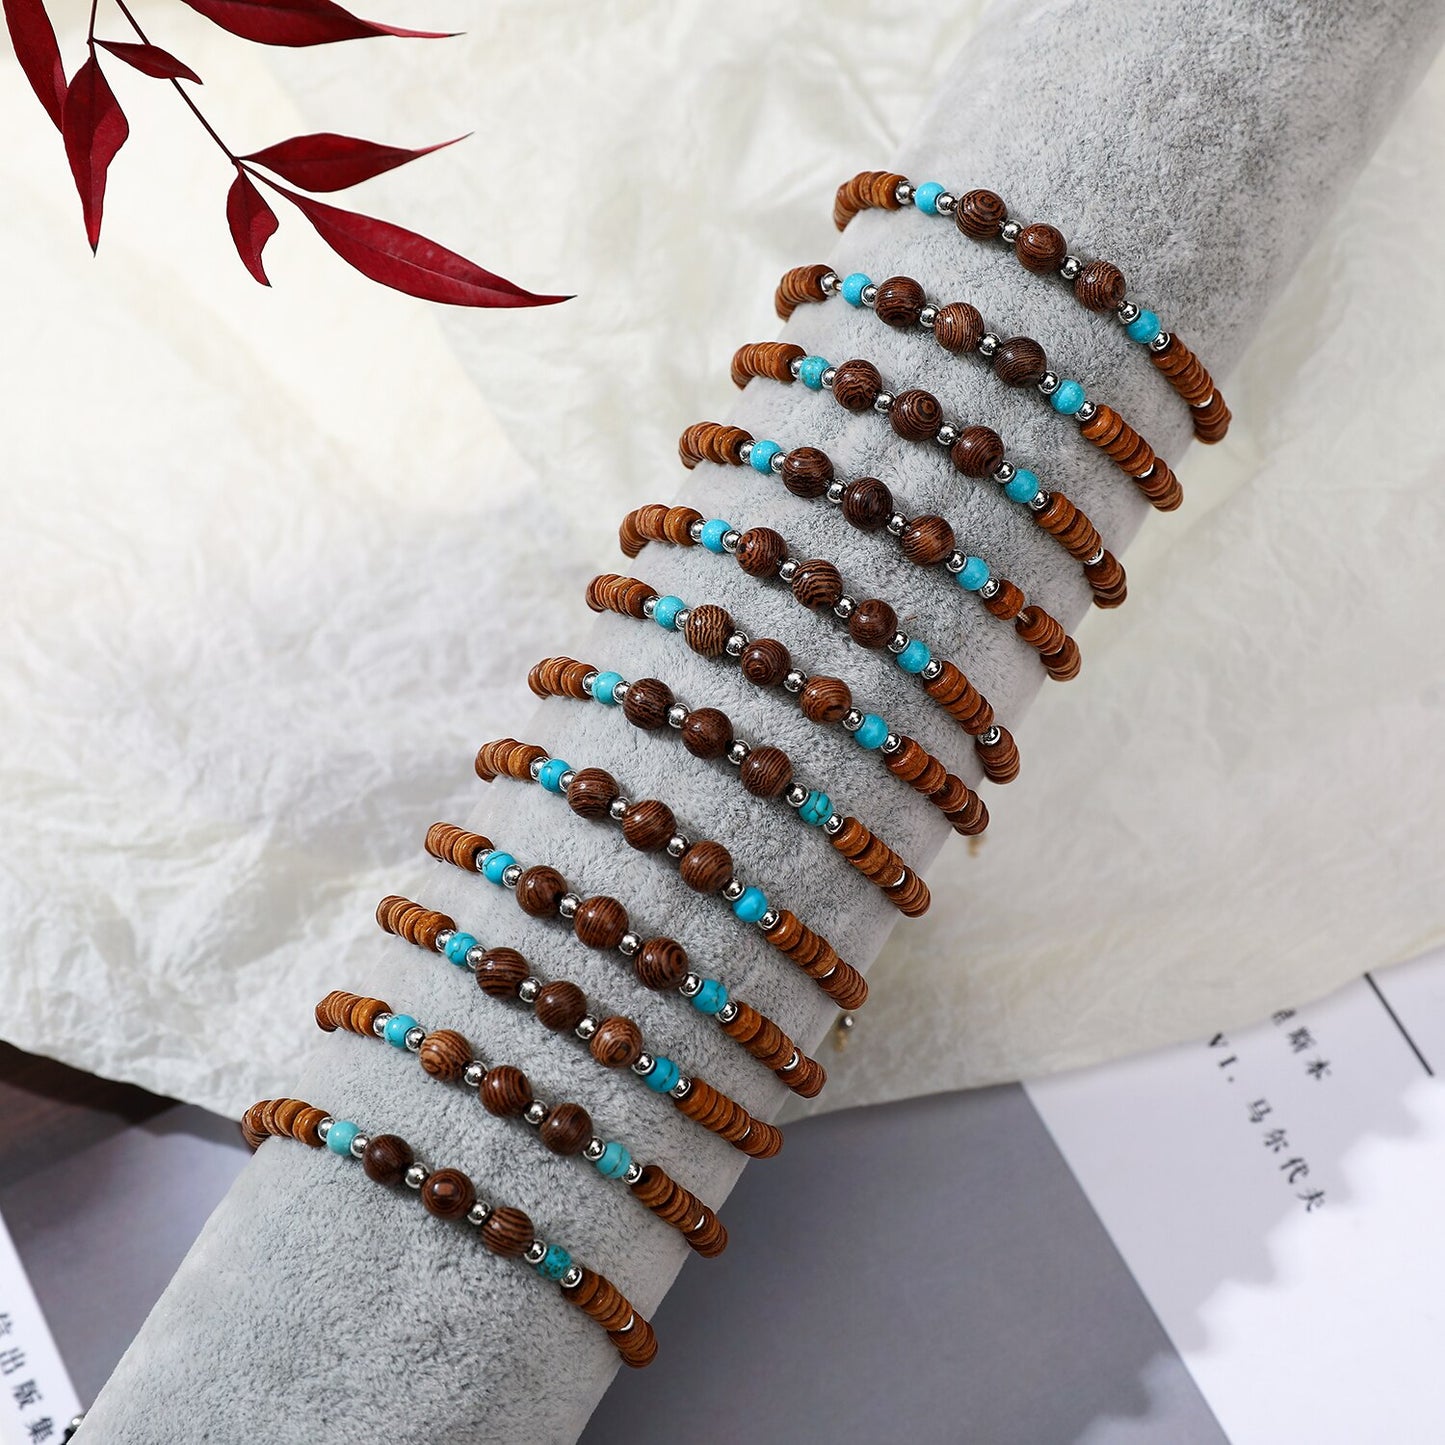 12 Pieces Round Wood Bead Charms Braided Bracelet for Women Child Adjustable Rope Chain Beads Anklet Jewelry Wholesale